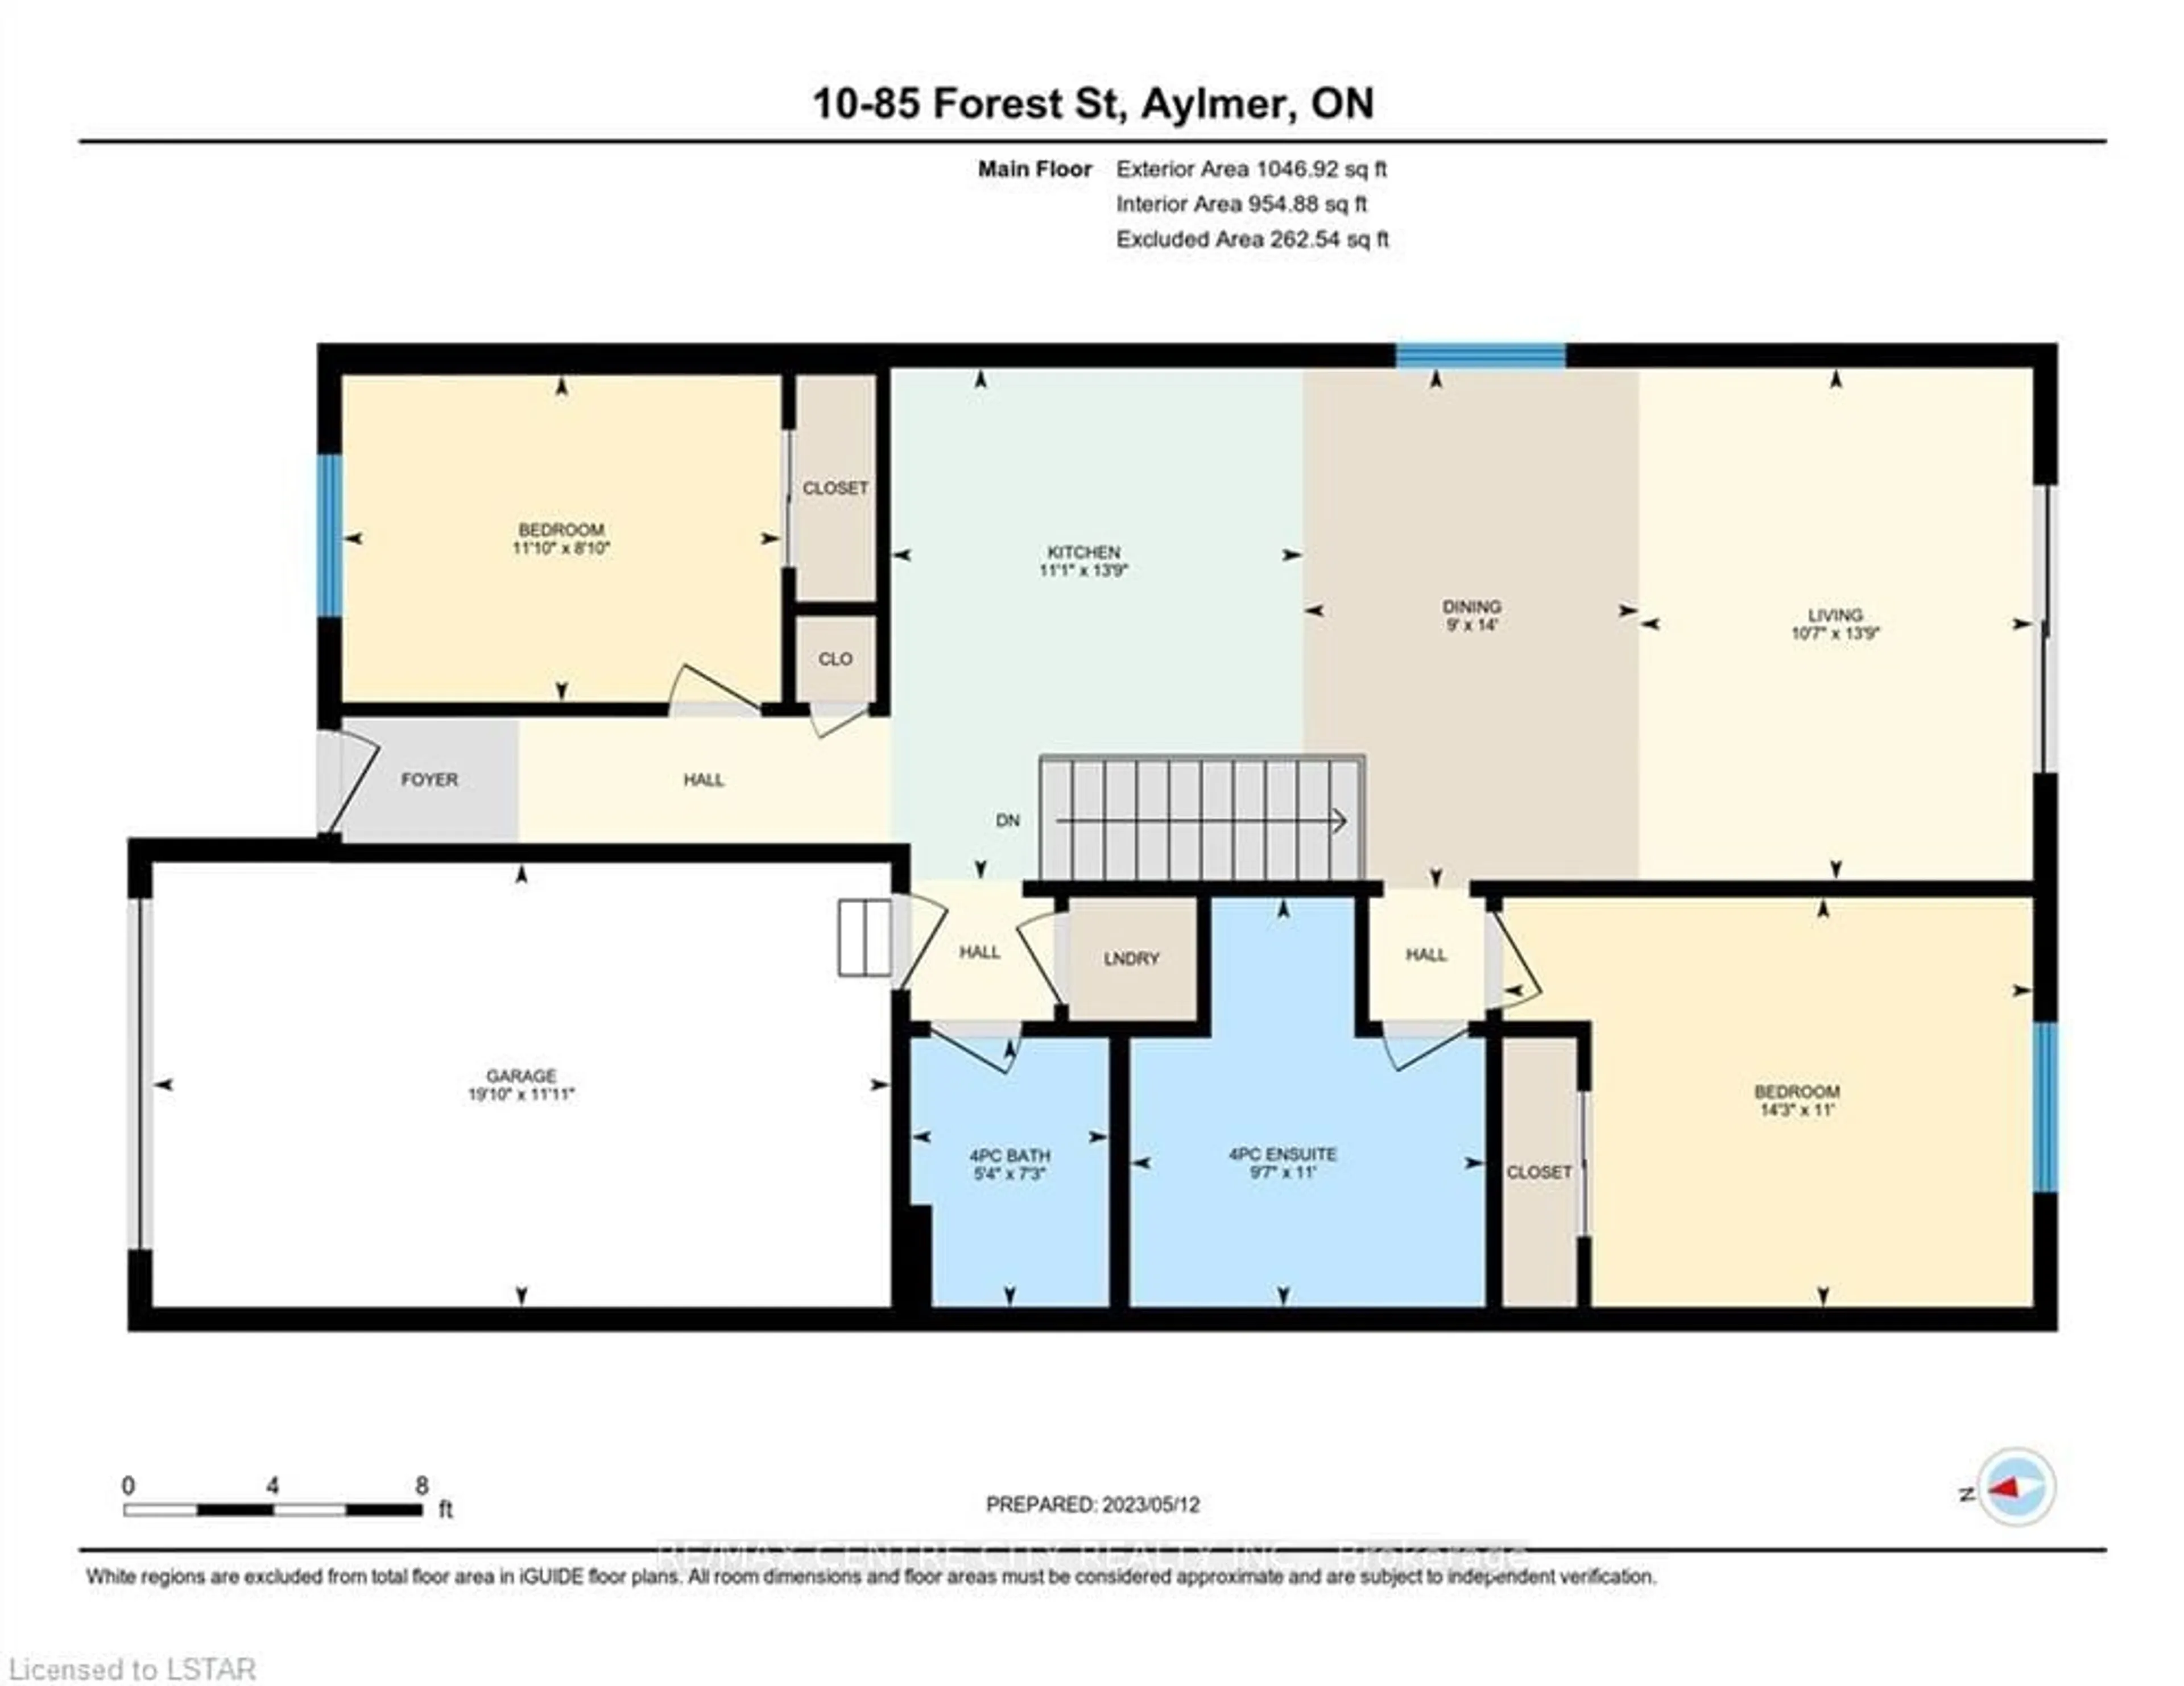 Floor plan for 85 Forest St #4, Aylmer Ontario N5H 1A5